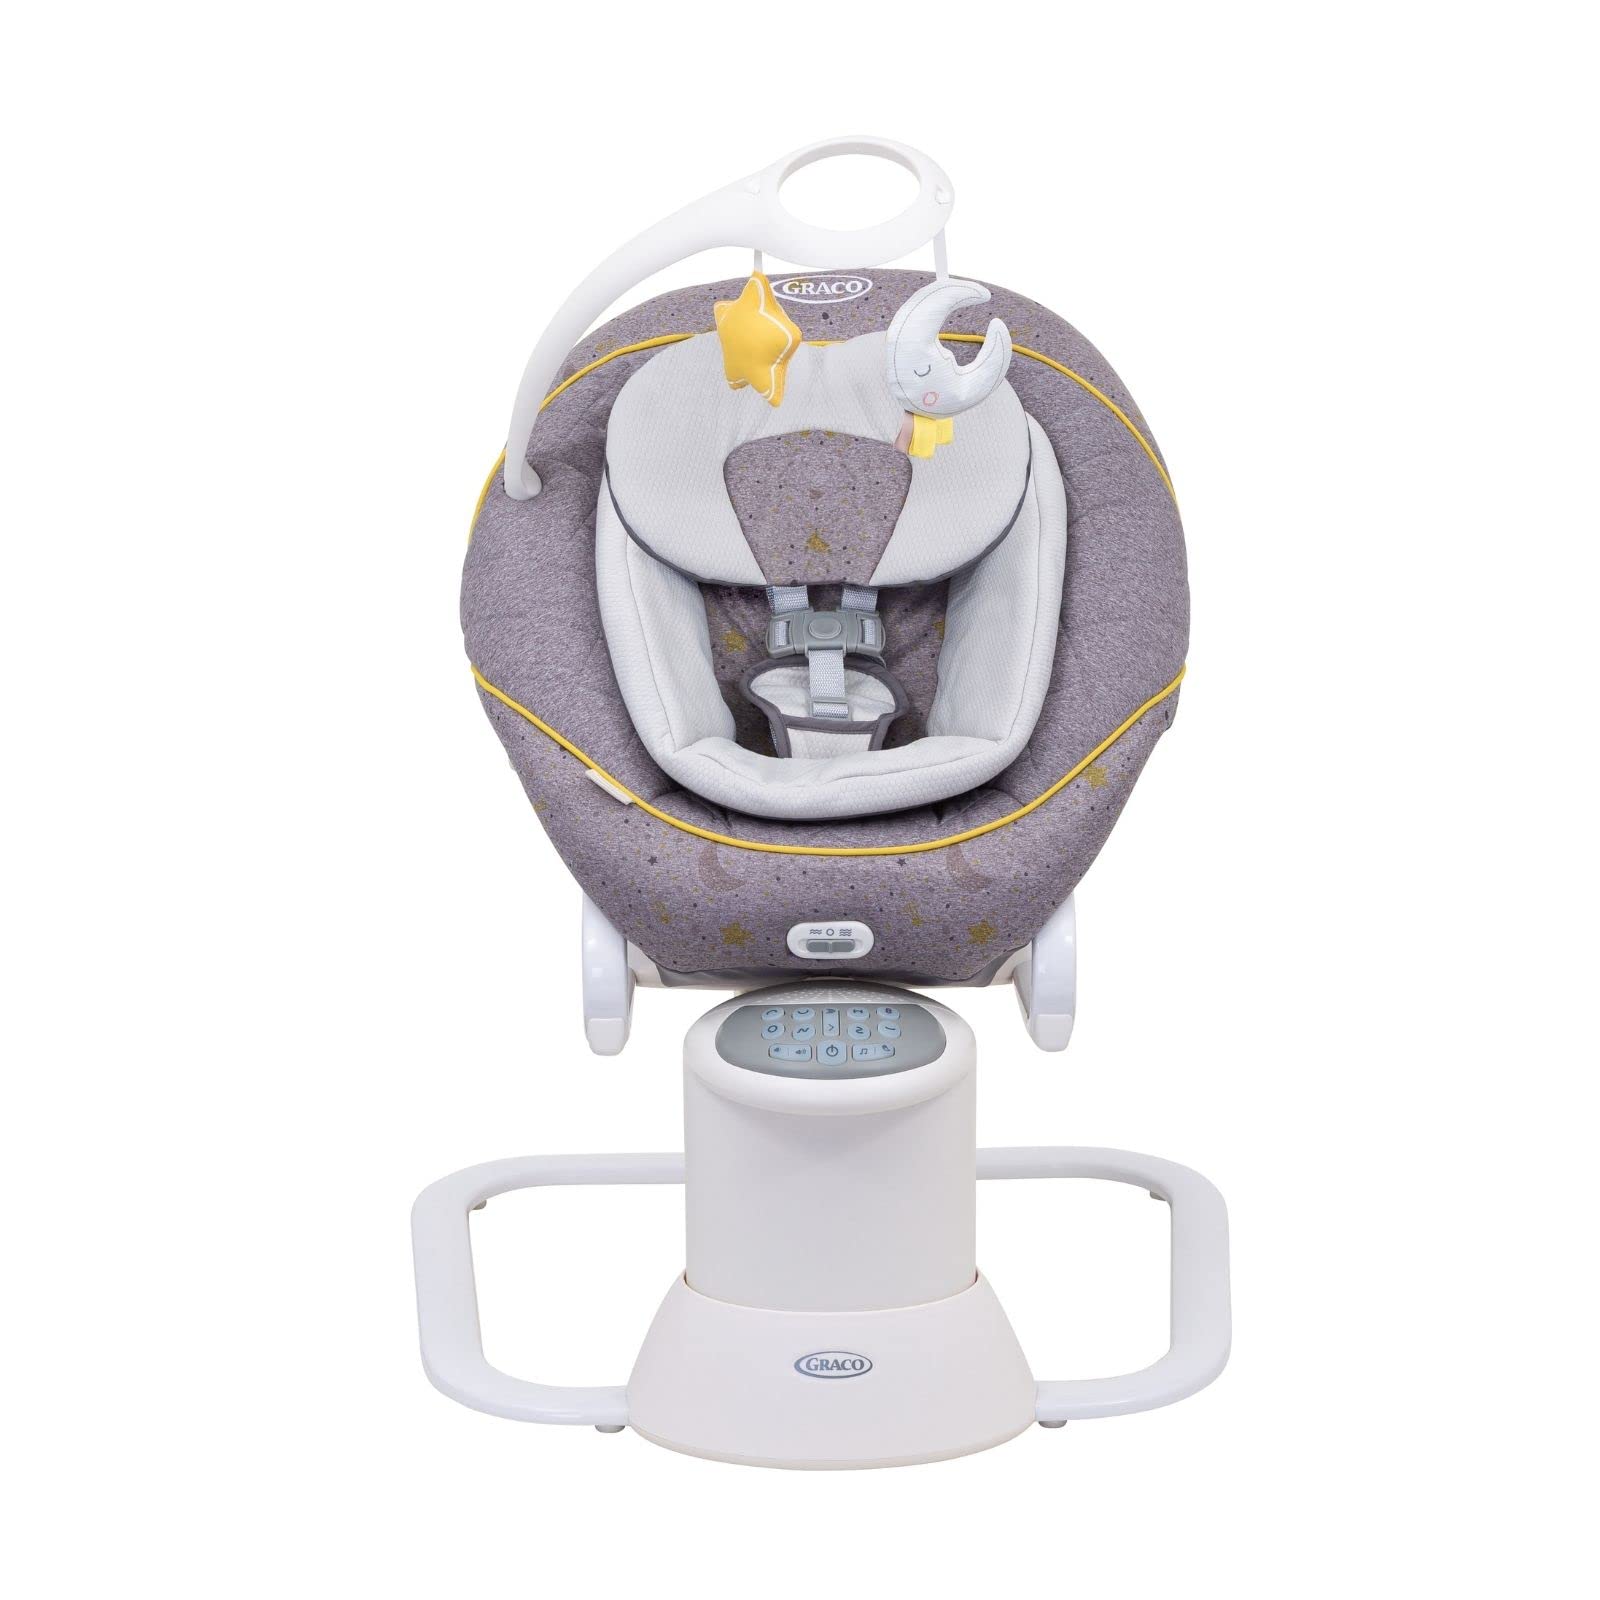 Graco All Ways Soother 2-in-1 Baby Swing and Portable Rocker 